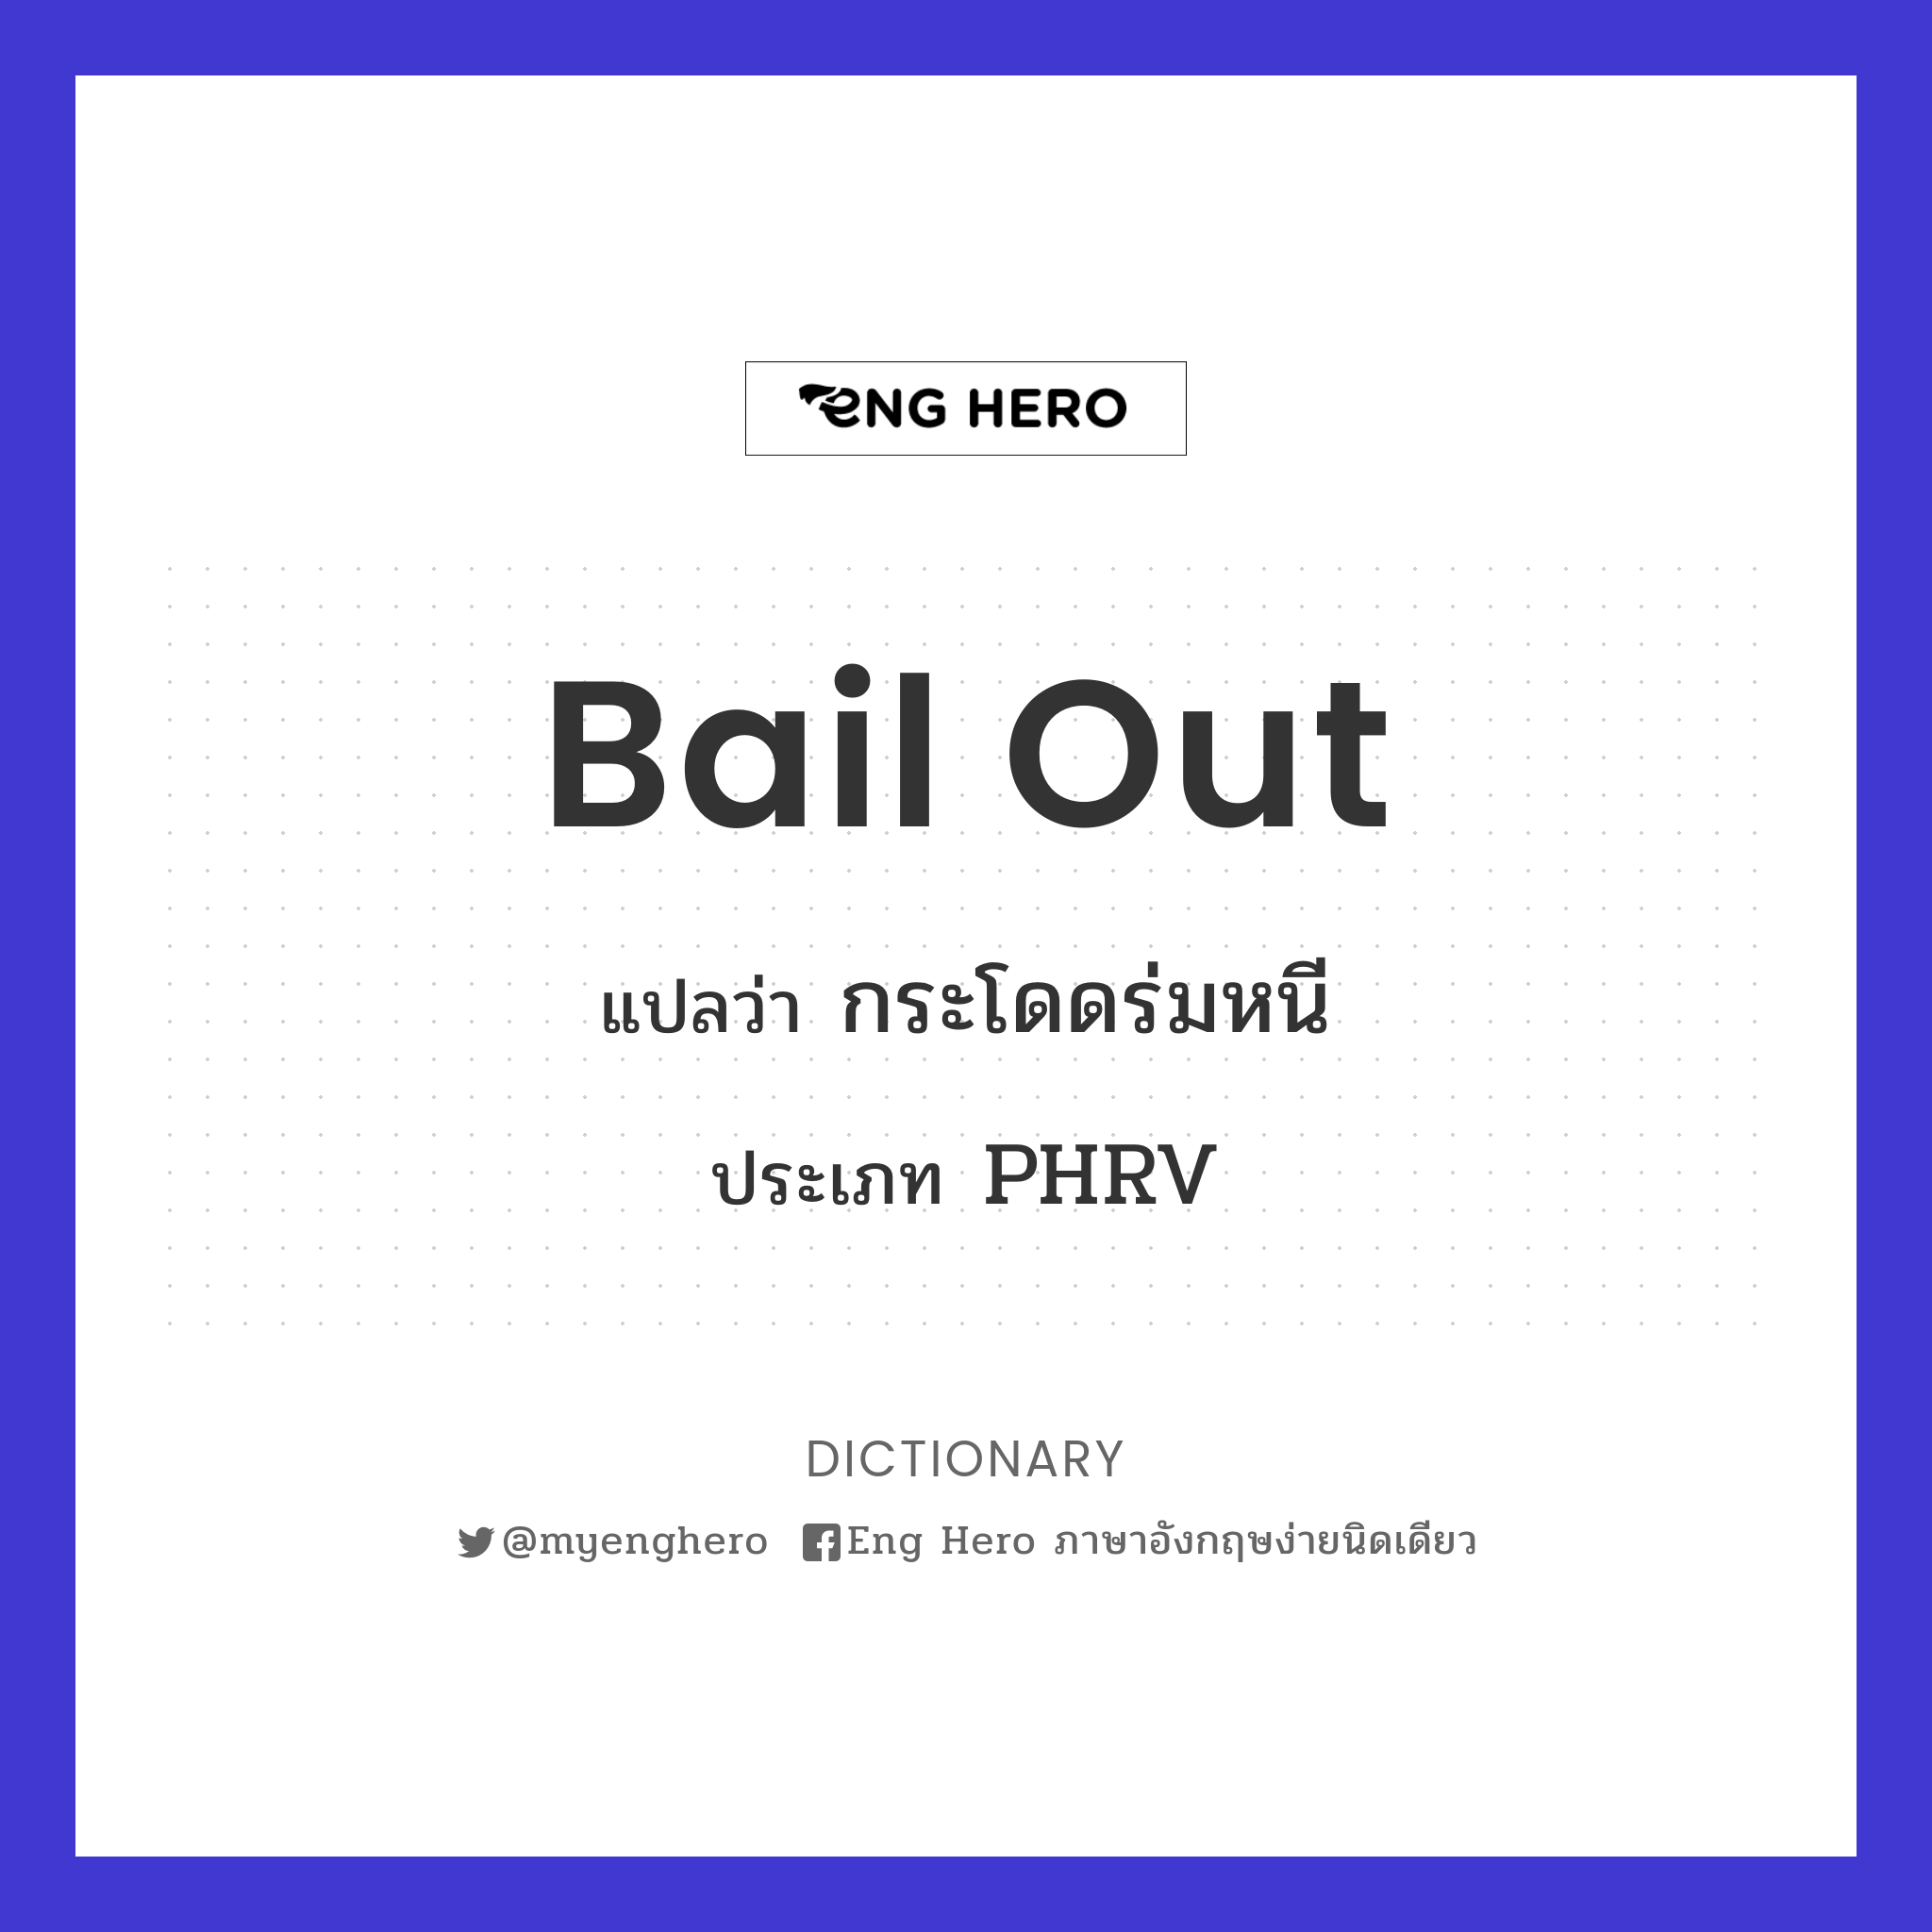 bail out